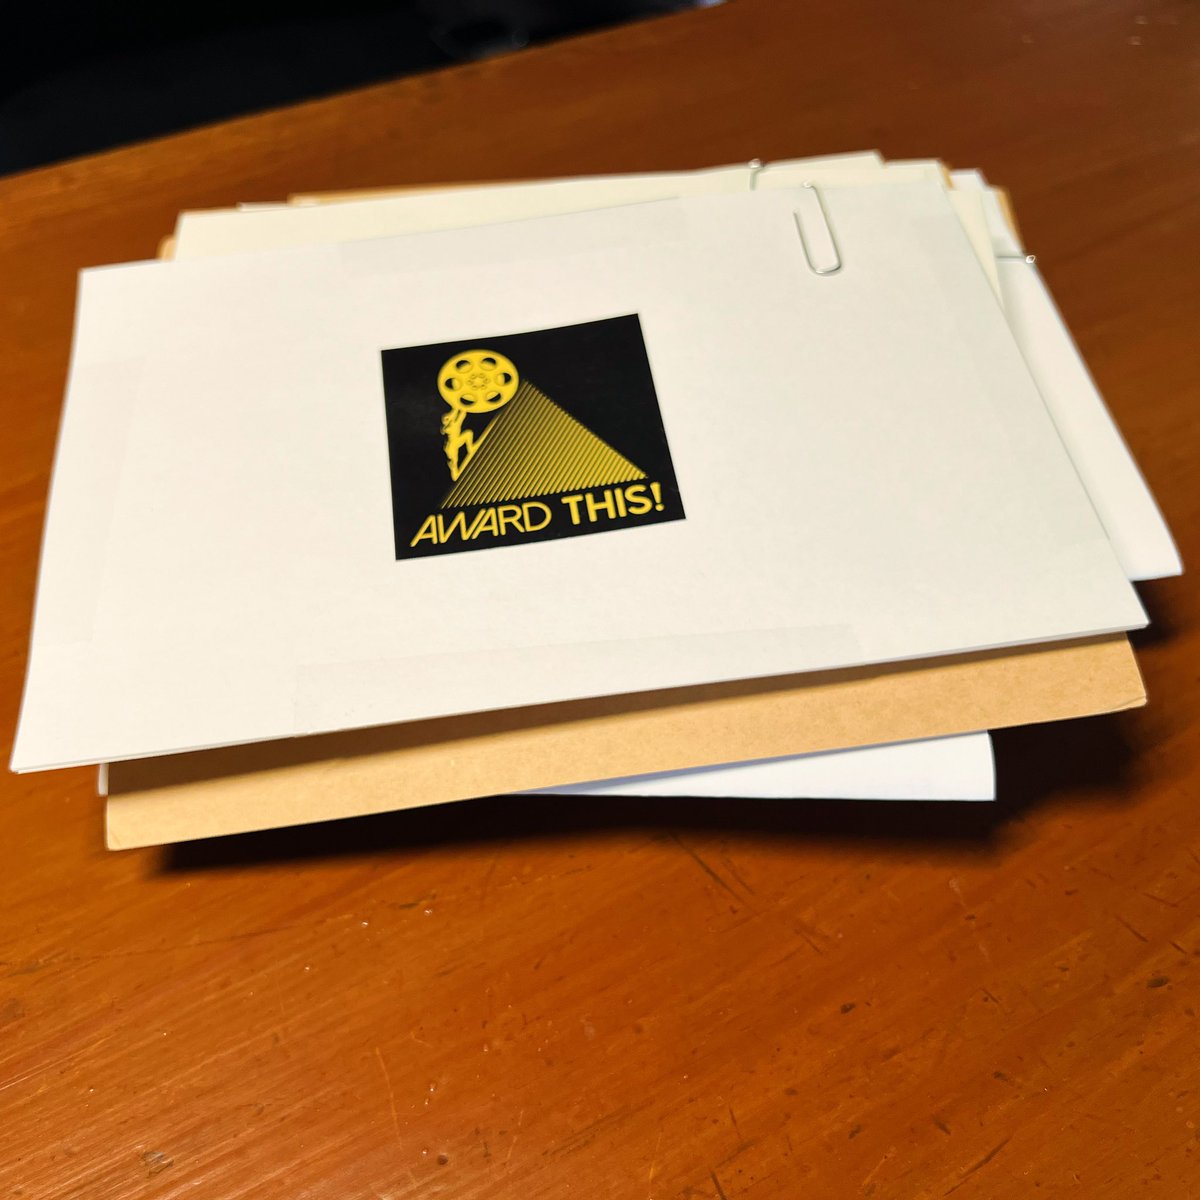 The envelopes with the winners are sealed until tonight. #AwardThis #awardthis2023